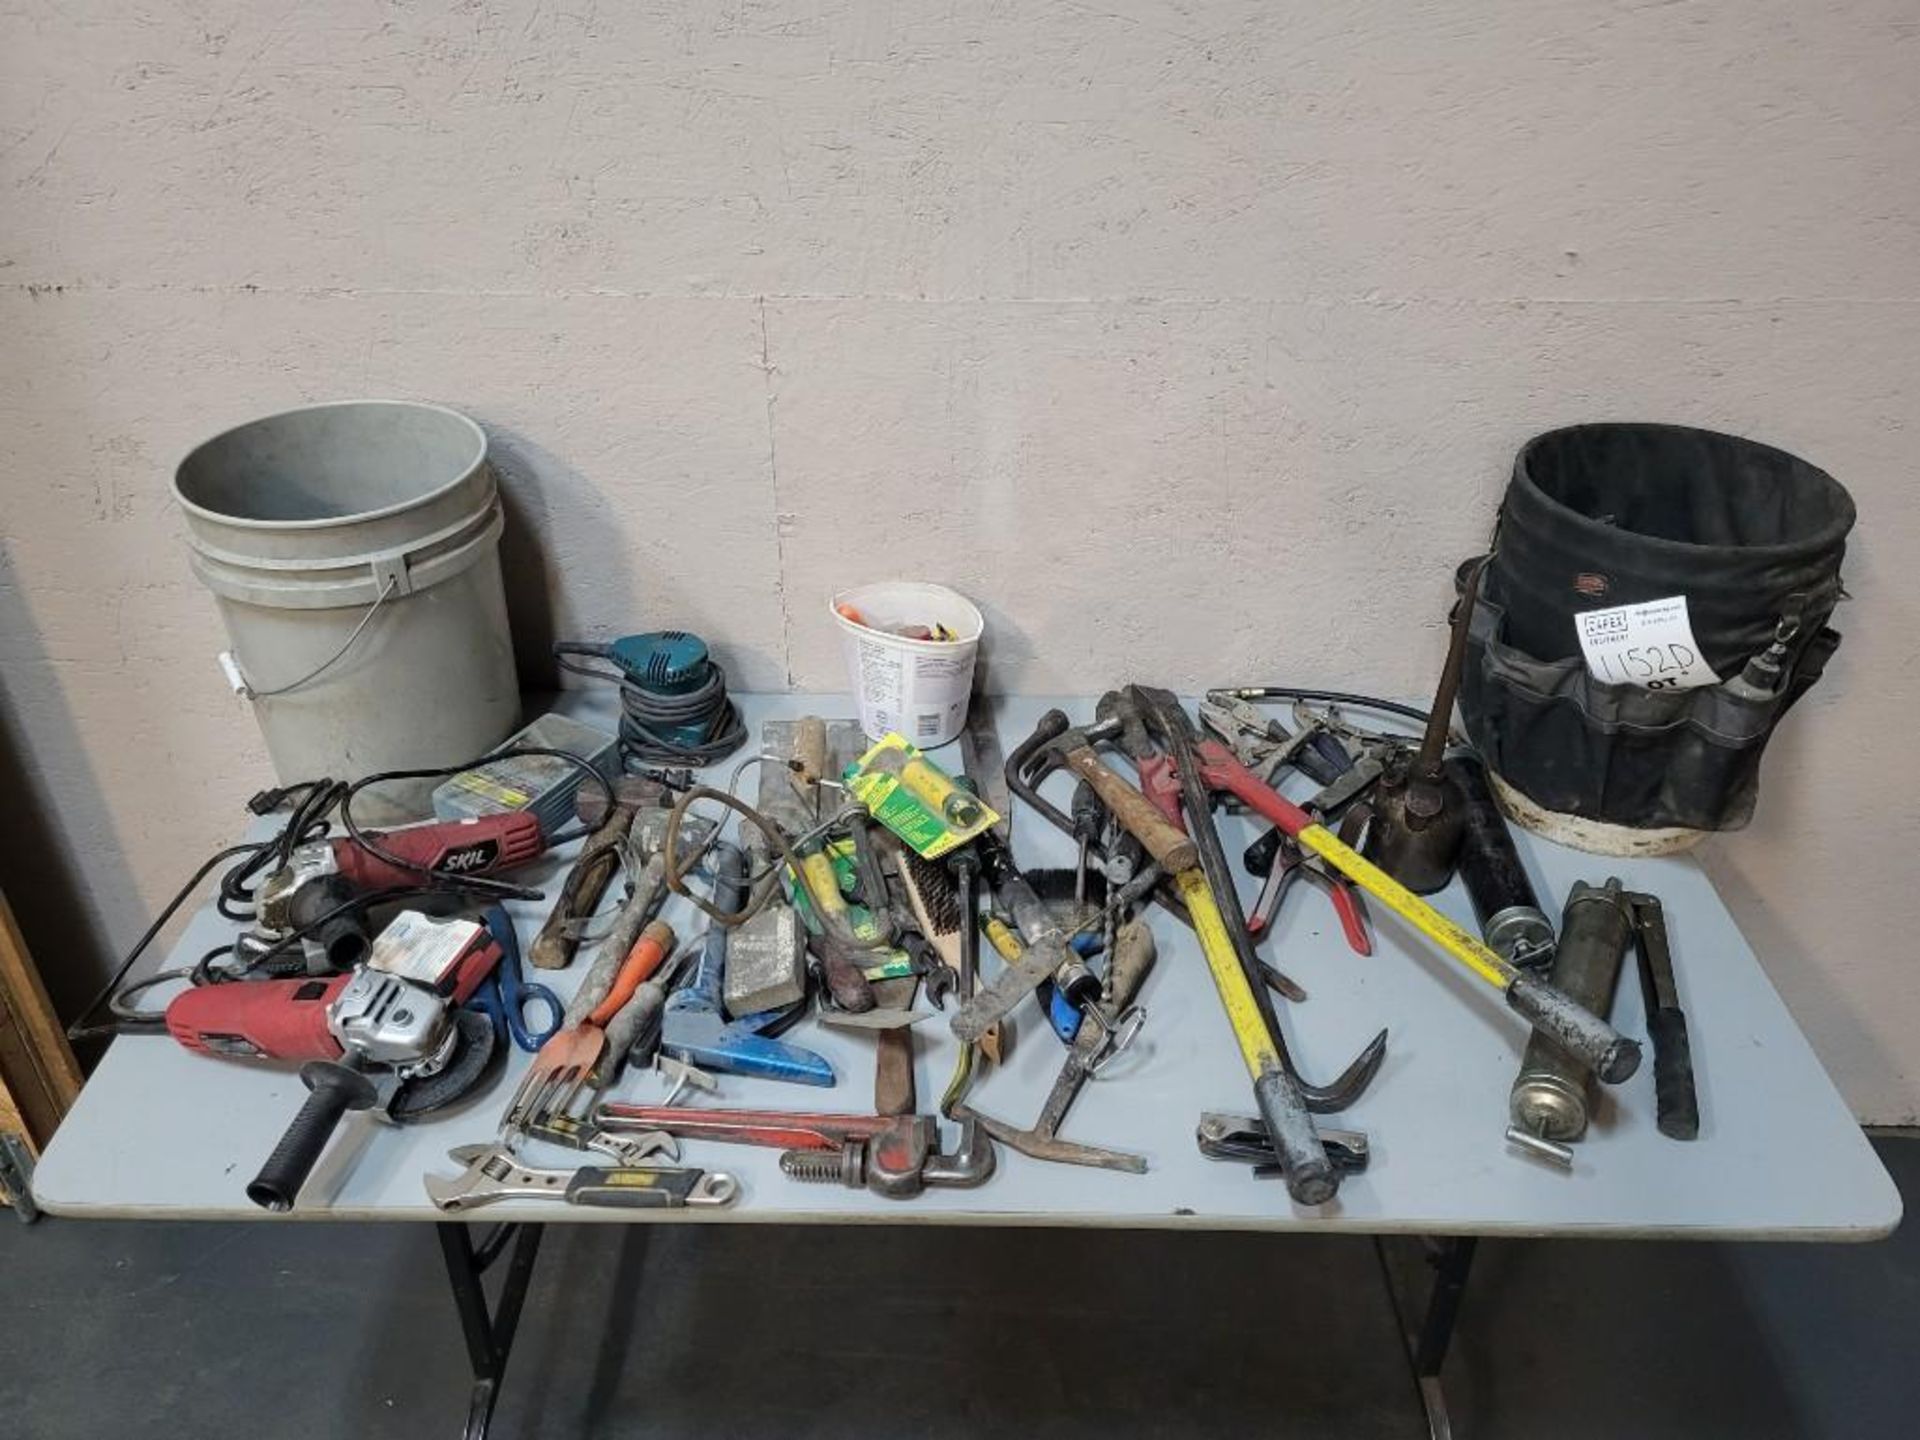 VALUE LOT Of Hand Tools And Power Tools